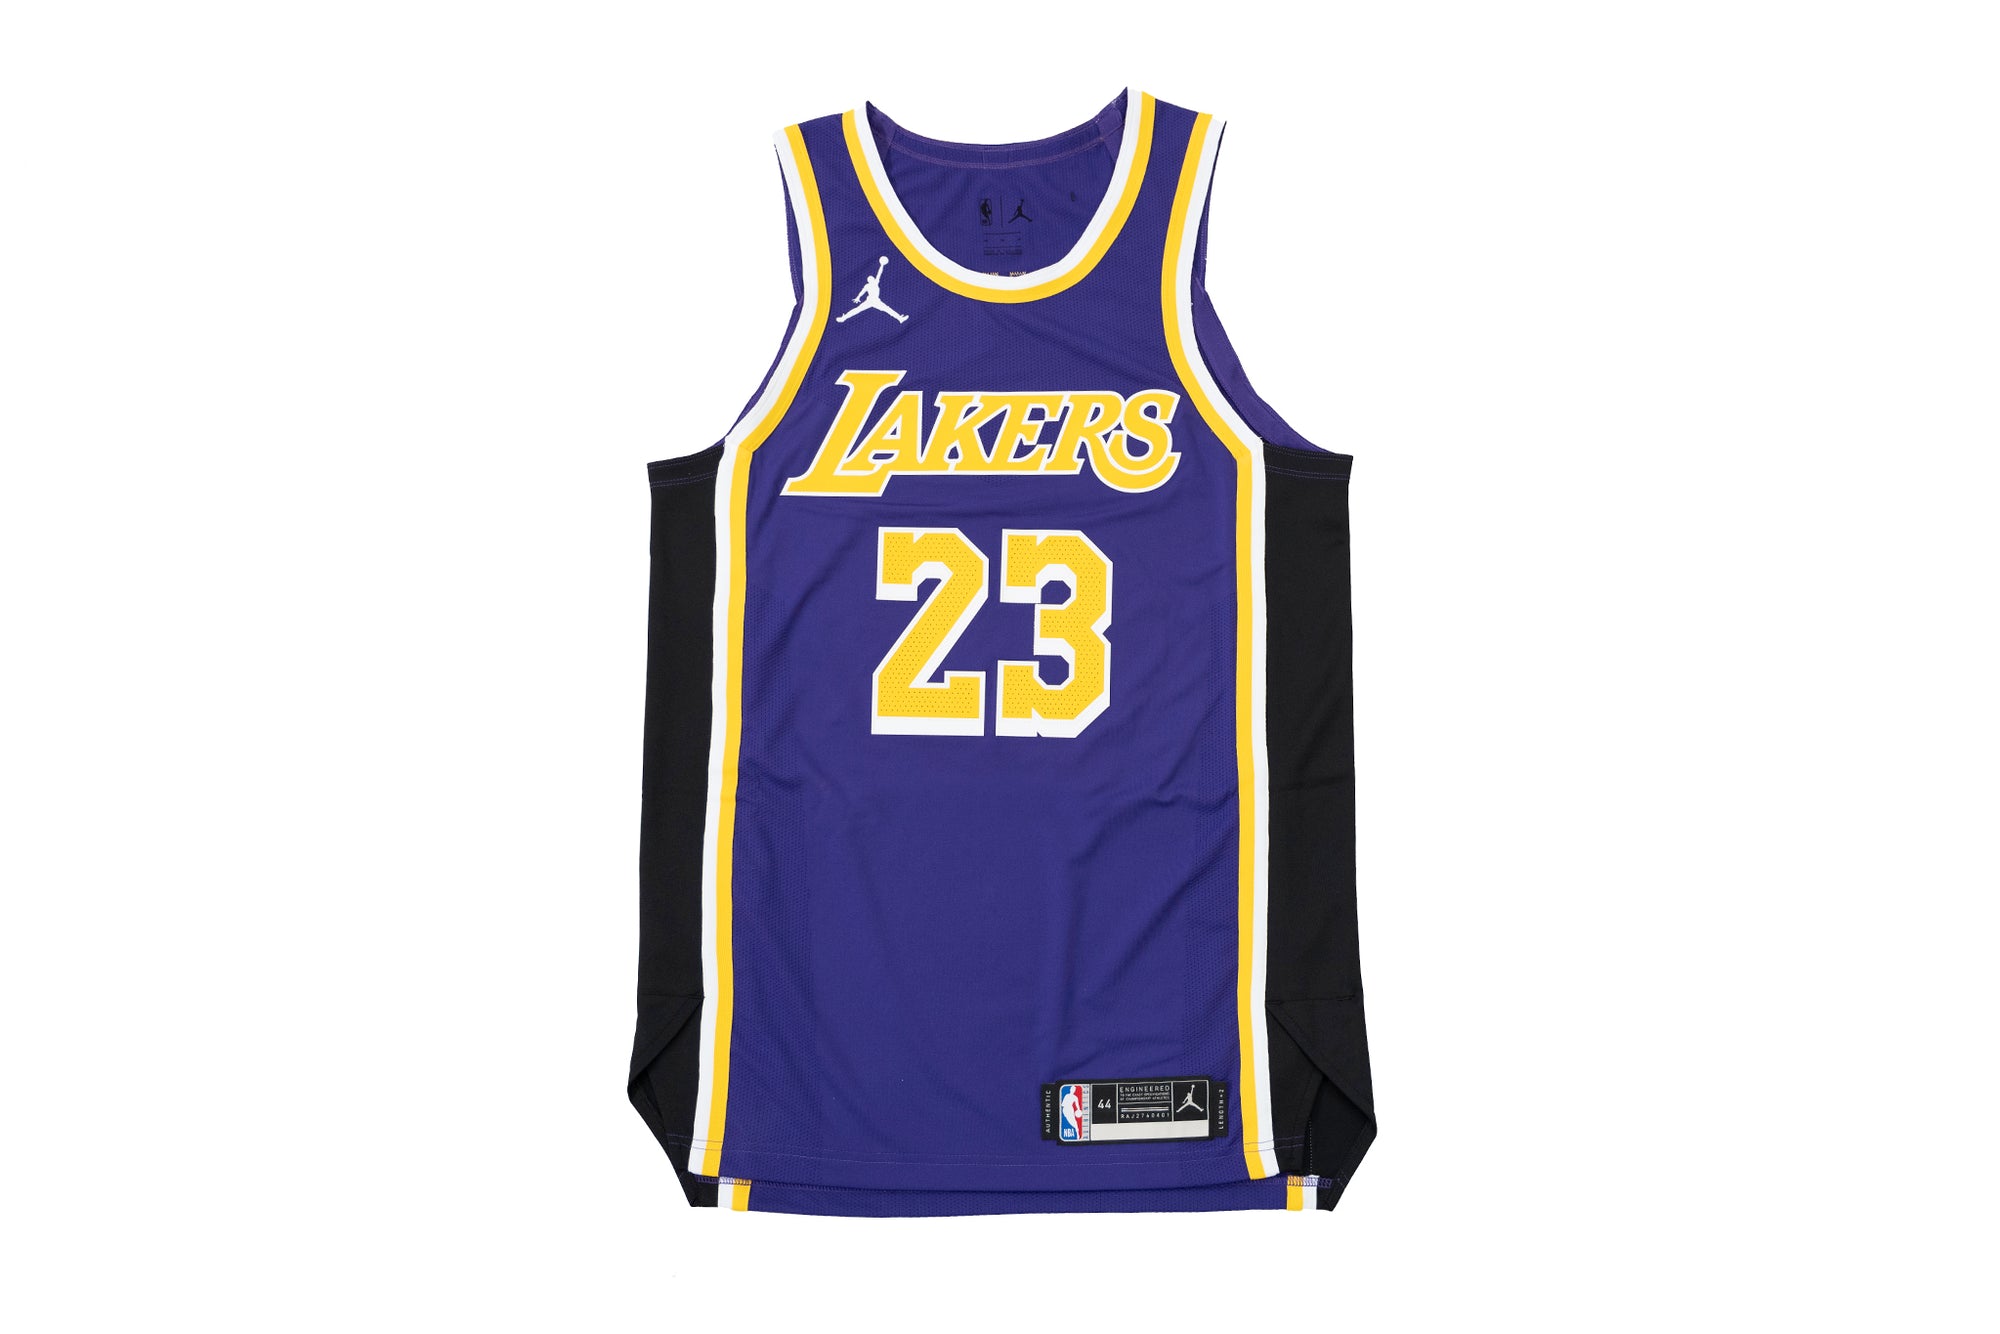 LeBron James Basketball Jersey for Youth, Women, or Men